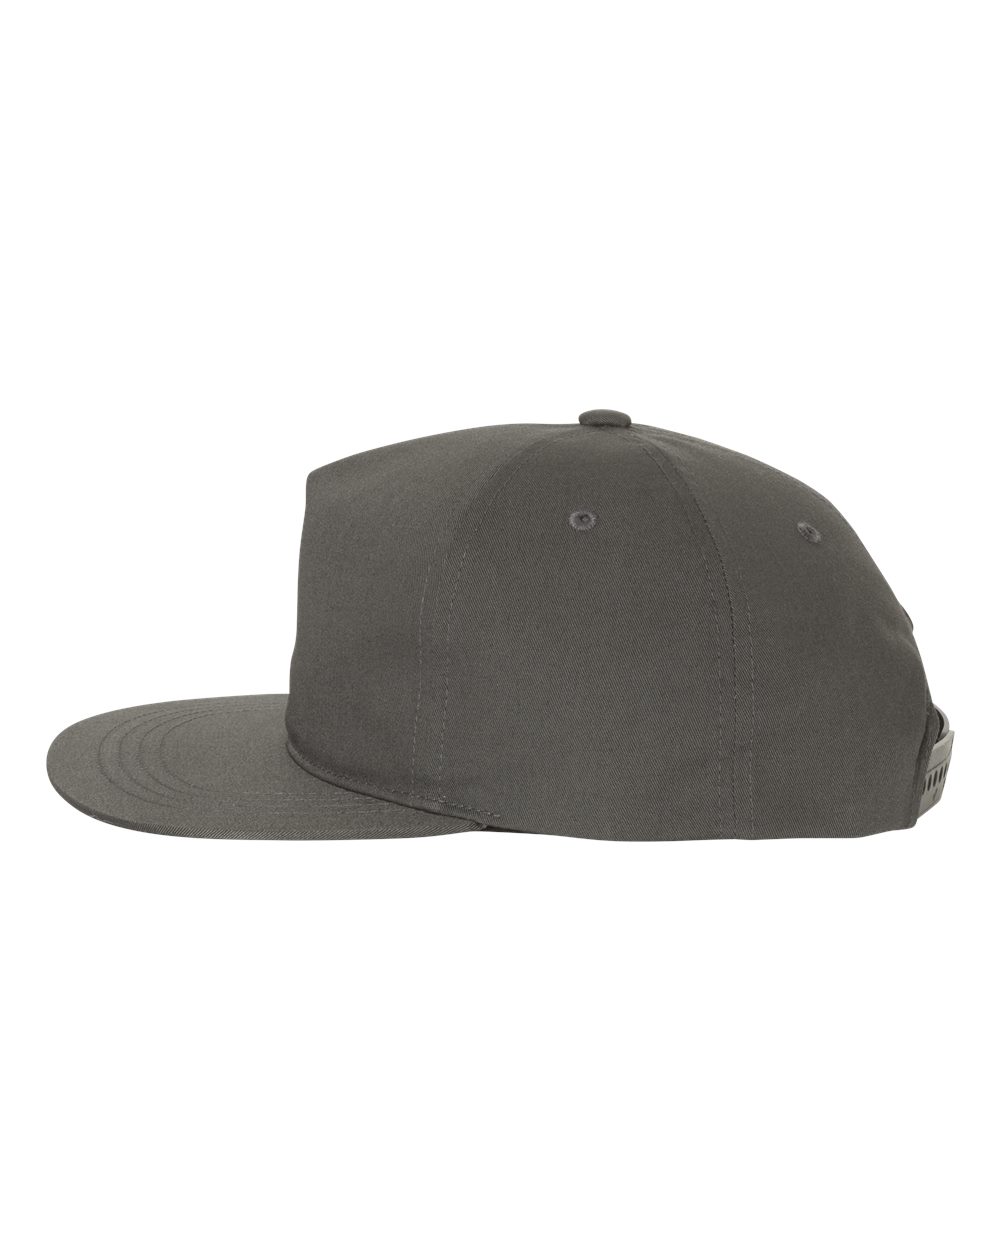 Yupoong 6502 - Unstructured Five-Panel Snapback Cap $5.20 - Headwear